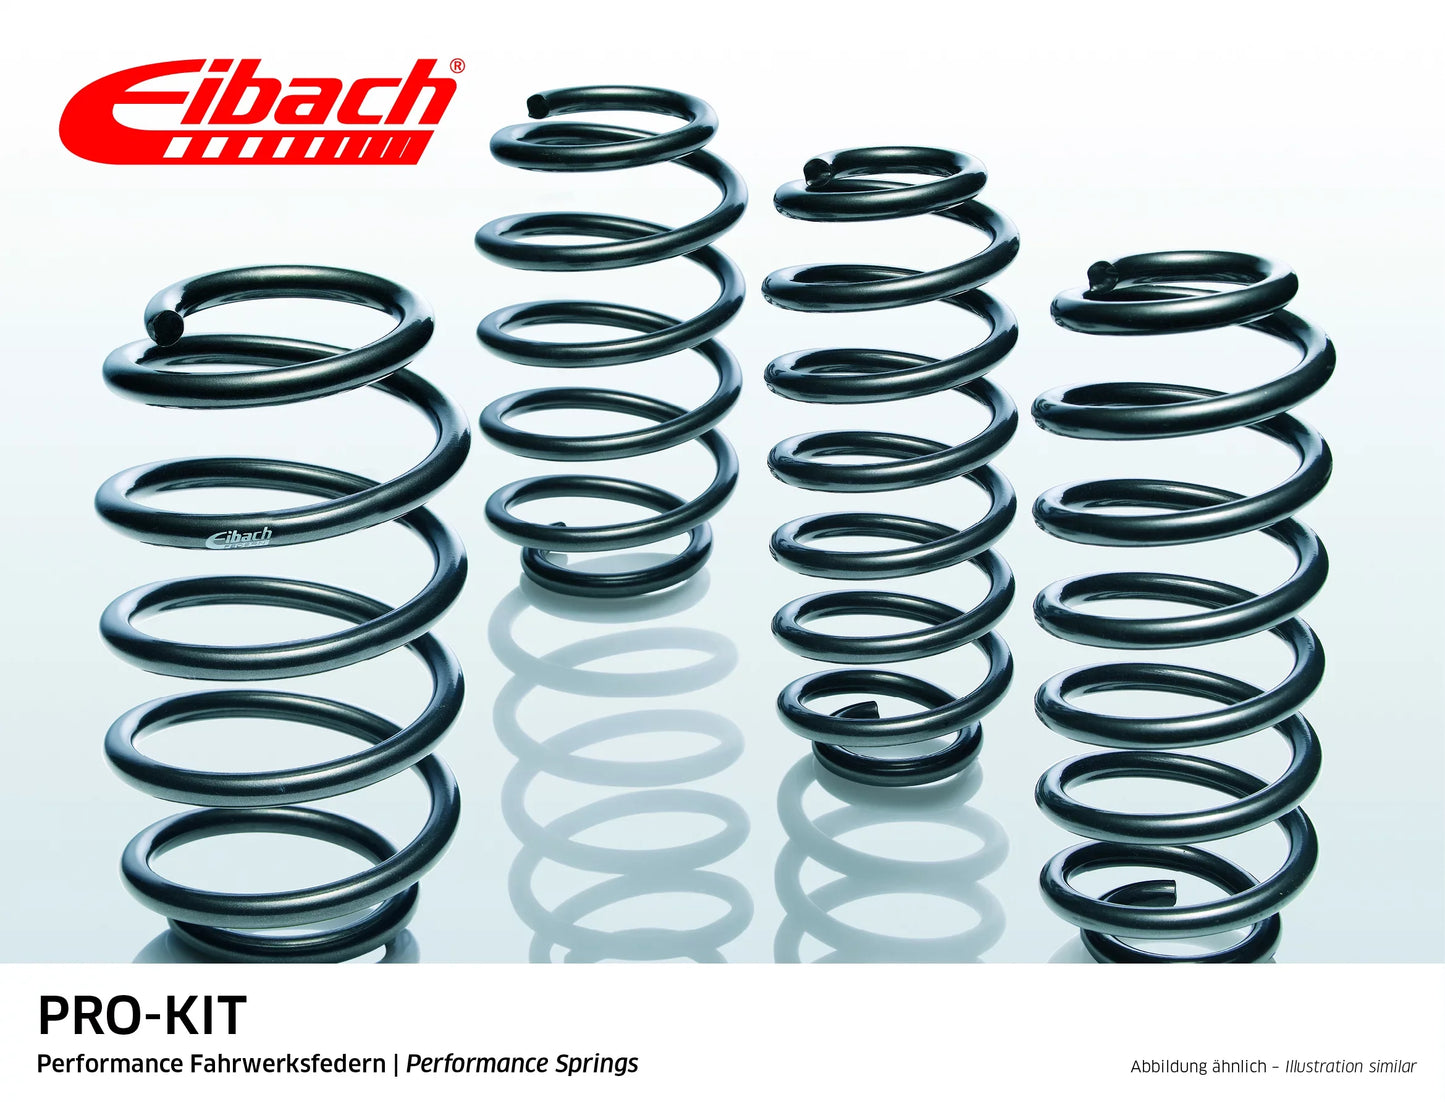 Eibach Pro-Kit Lowering Springs (E10-75-008-01-22) at £220.49